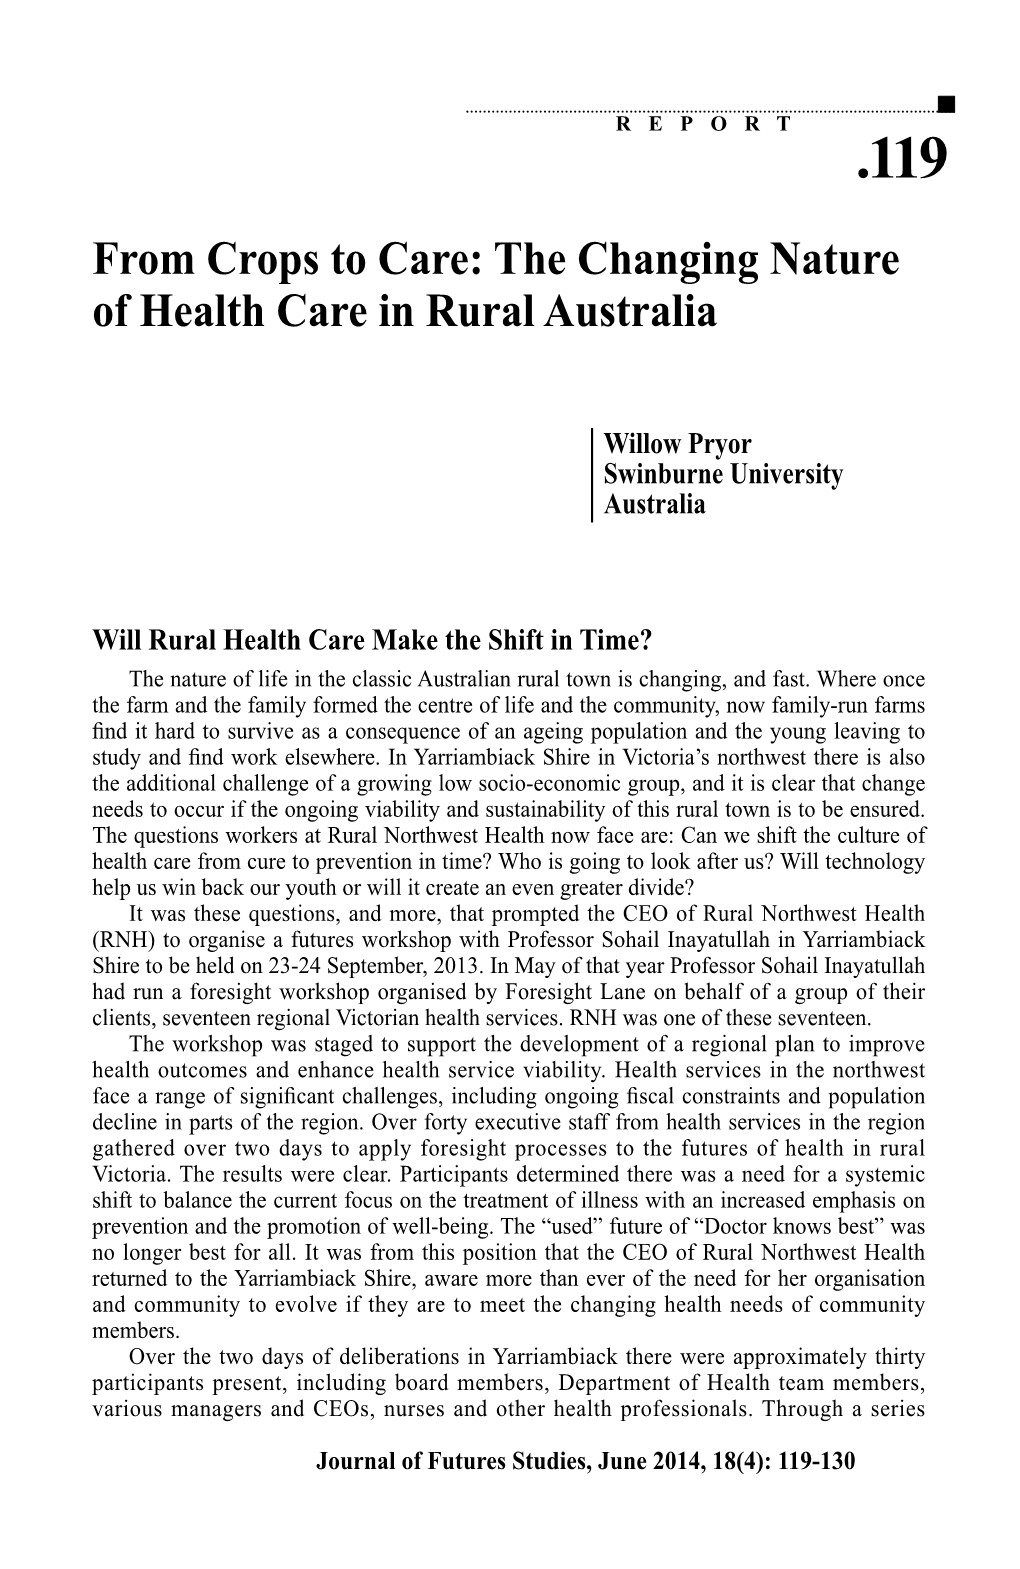 From Crops to Care: the Changing Nature of Health Care in Rural Australia